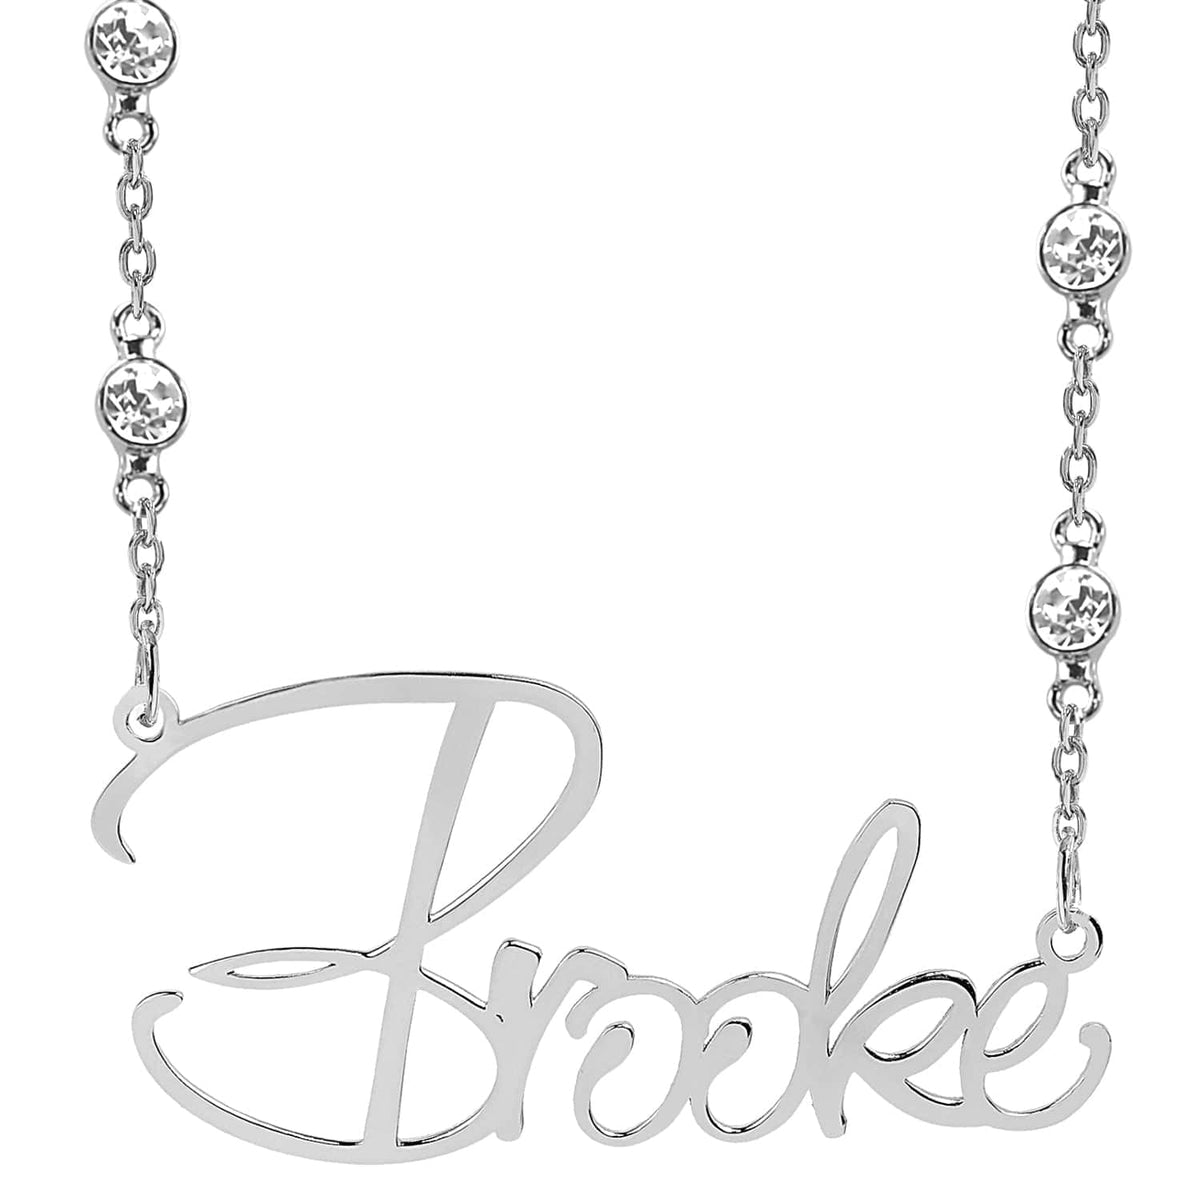 Silver Plated / Zirconia Chain &quot;Brooke Style&quot; Name Plate Necklace